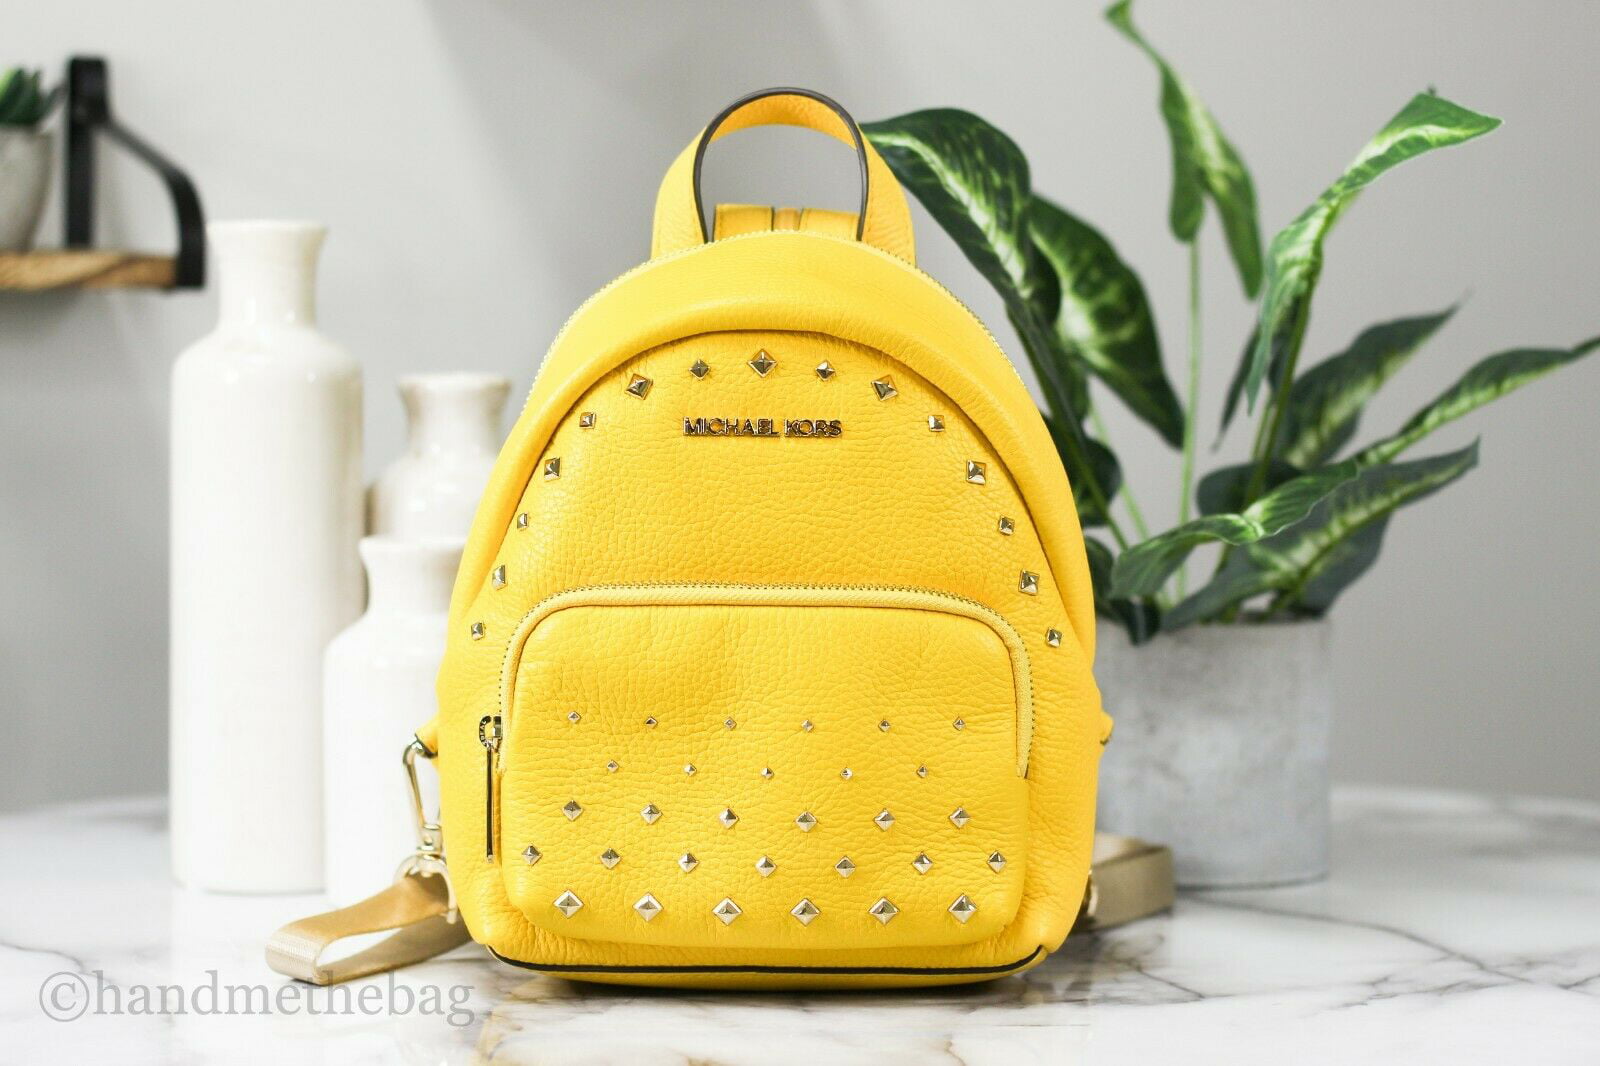 Abbey leather backpack Michael Kors Yellow in Leather  31596617